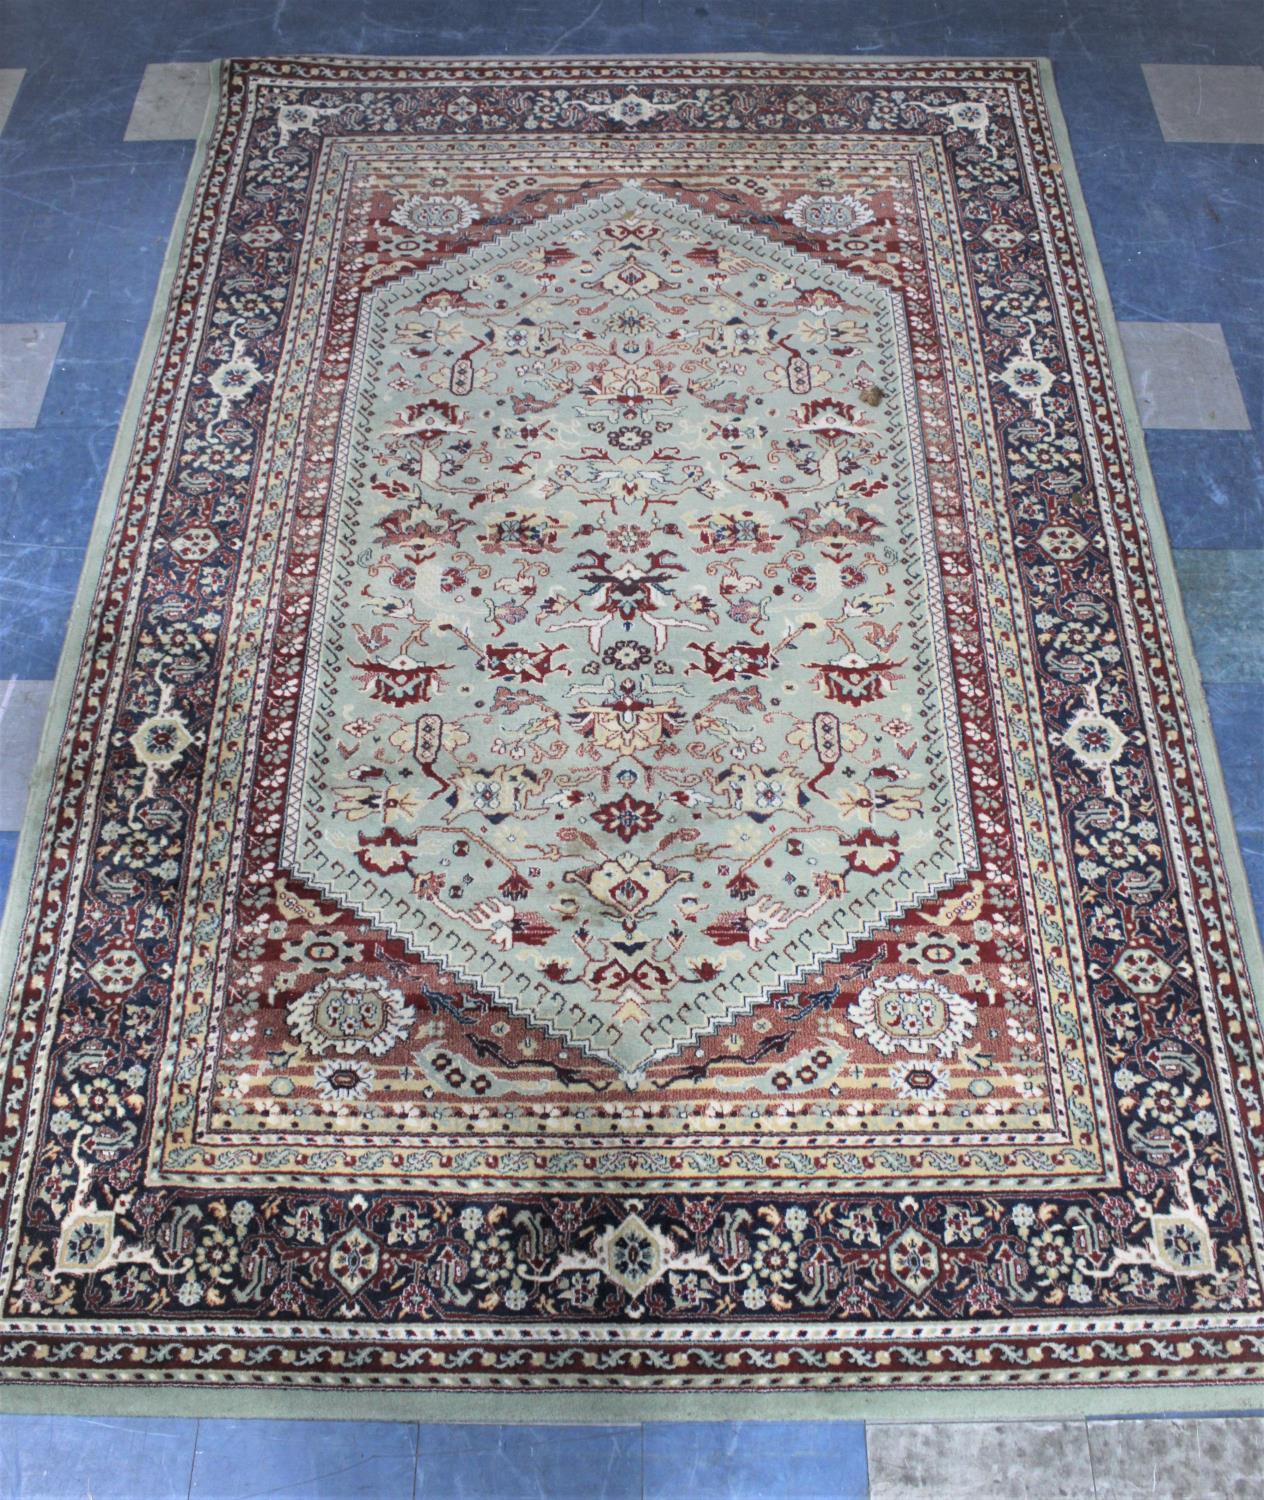 A Machine Woven Patterned Rug, 300x200cm